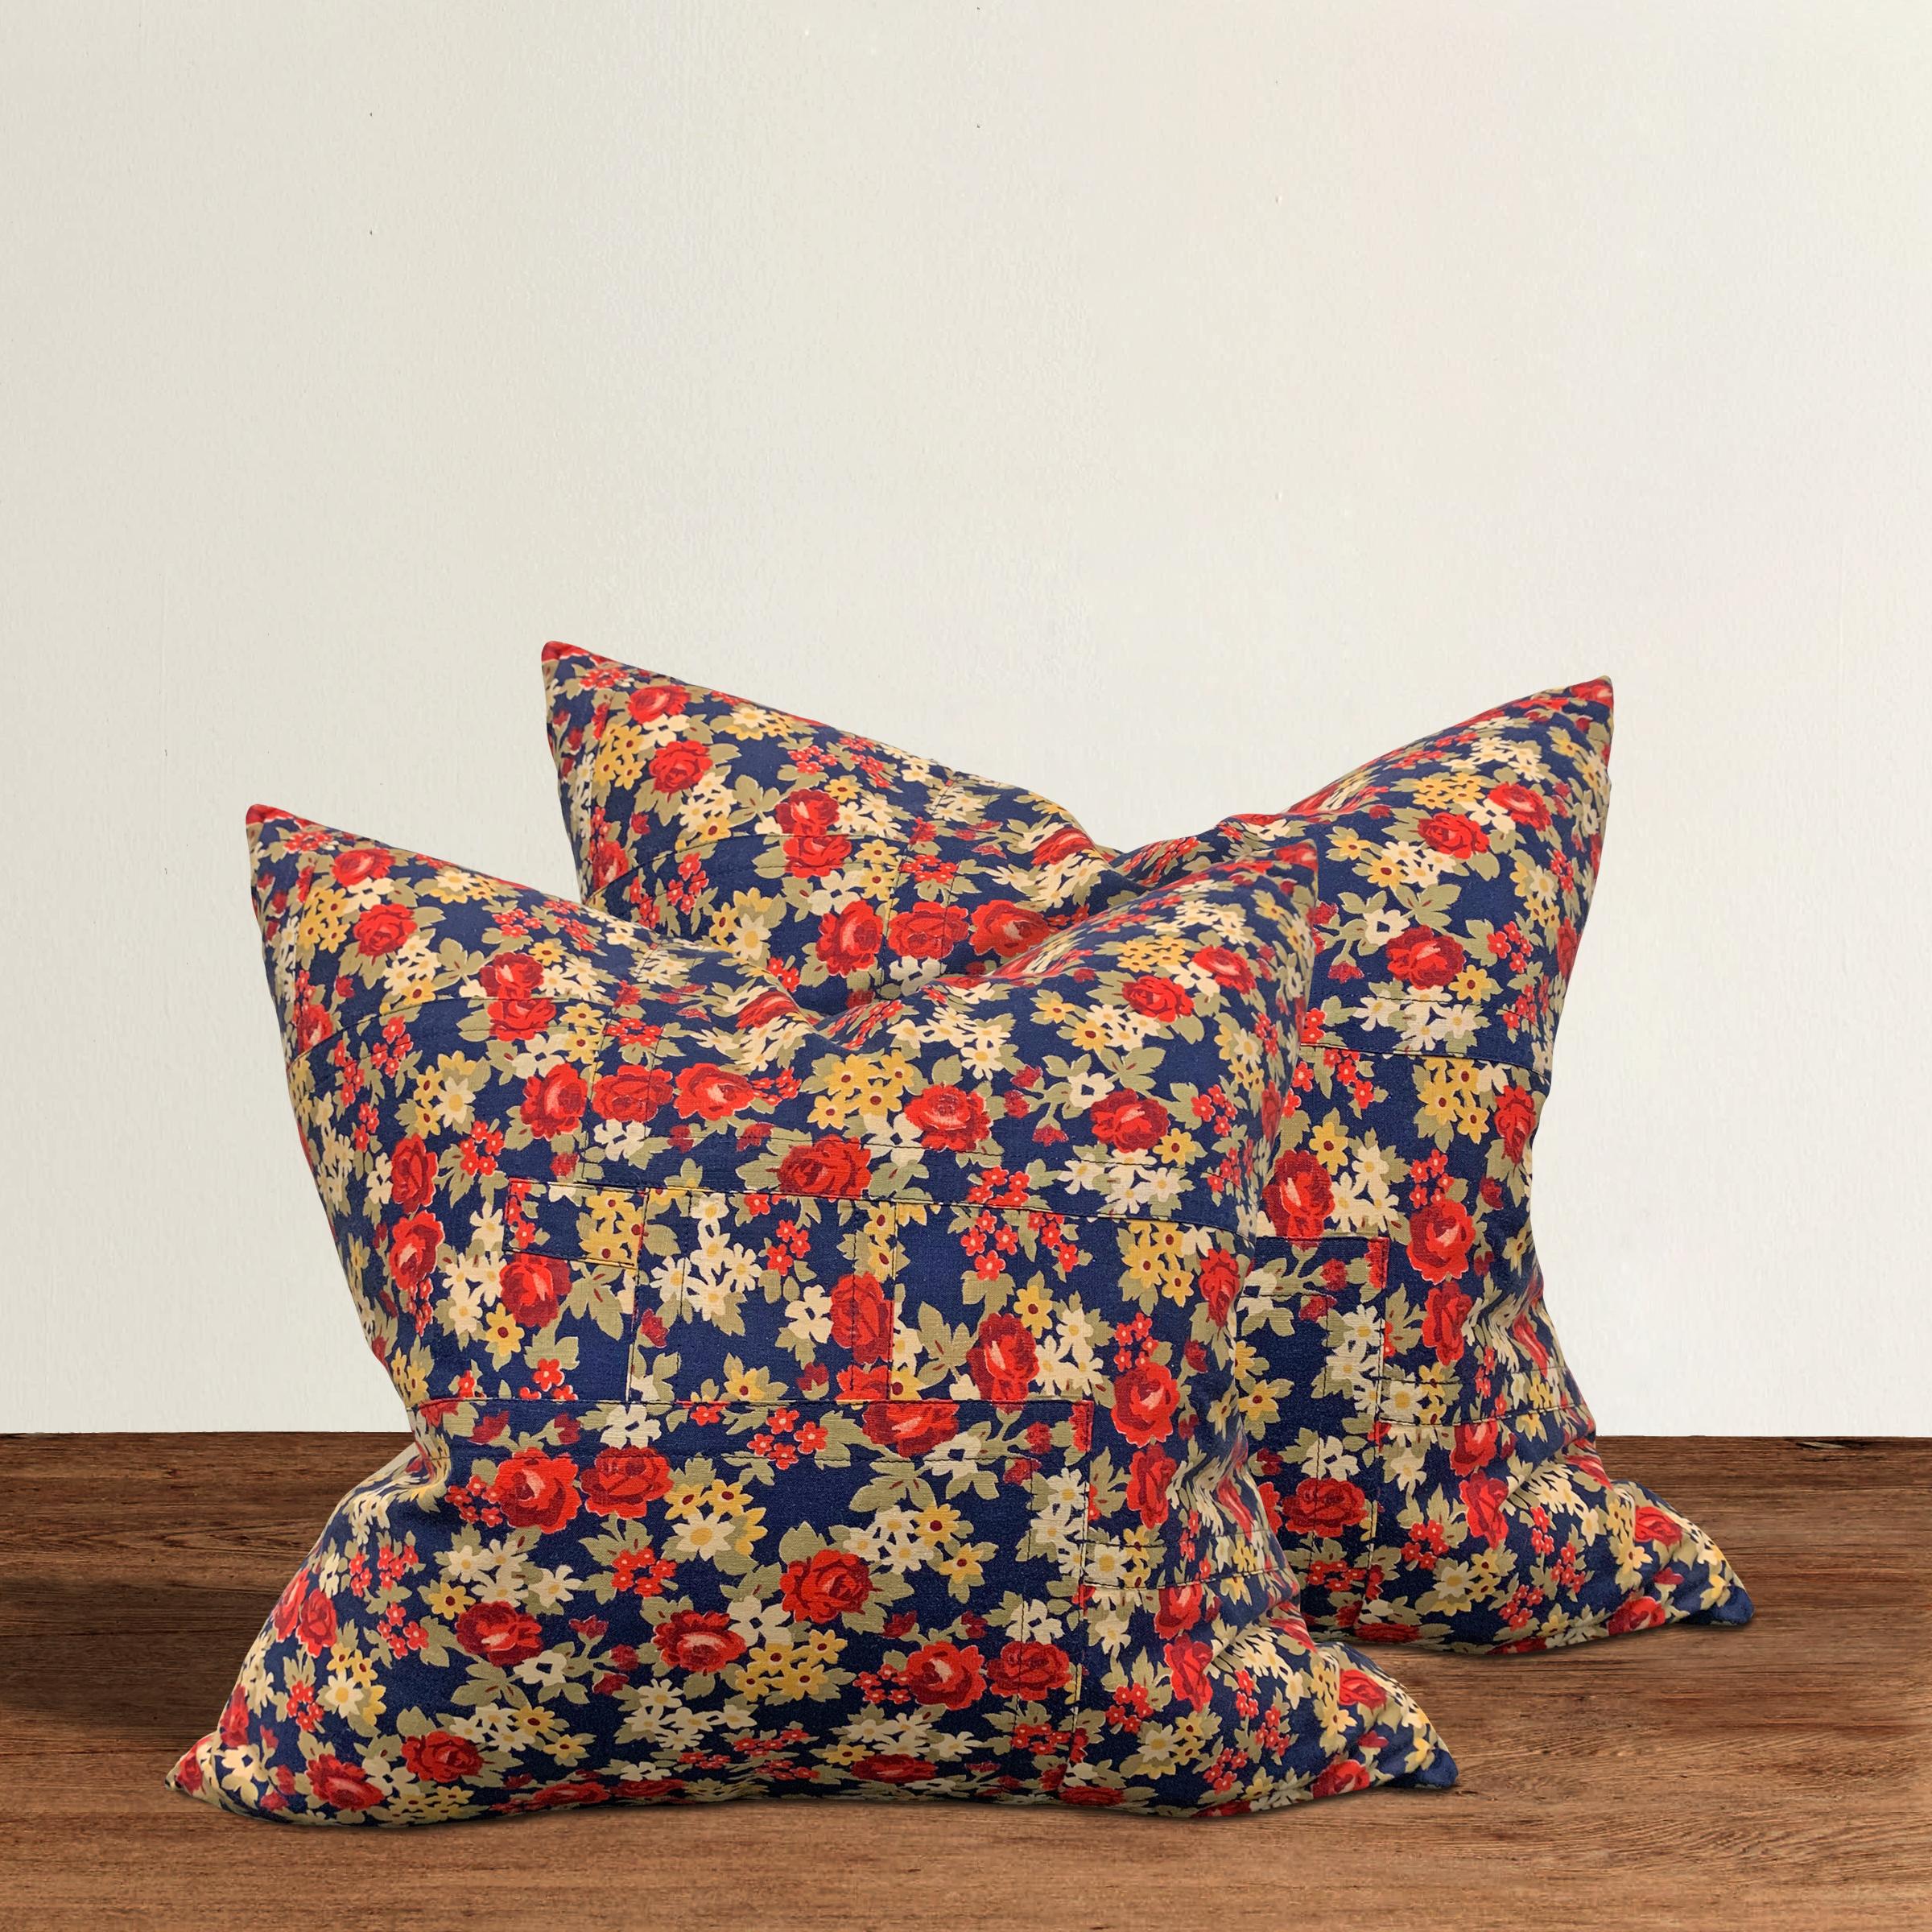 Pair of pillows made from 19th century Russian block printed cotton panels with multicolored flowers, backed with solid linen and filled with down.